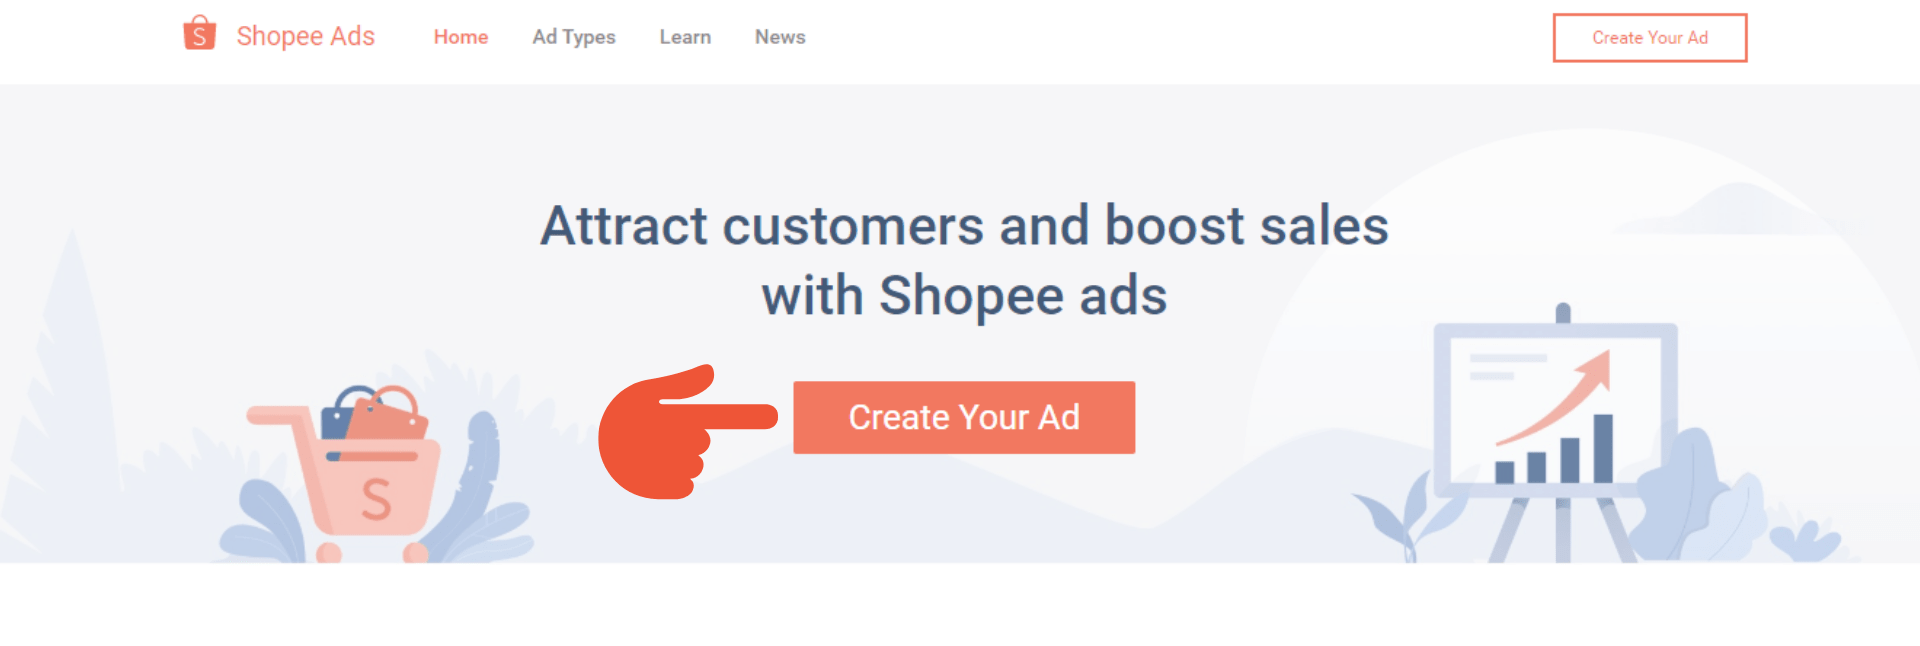 Shopee Advertising - How to Choose Keywords and Optimize Shopee My Ads